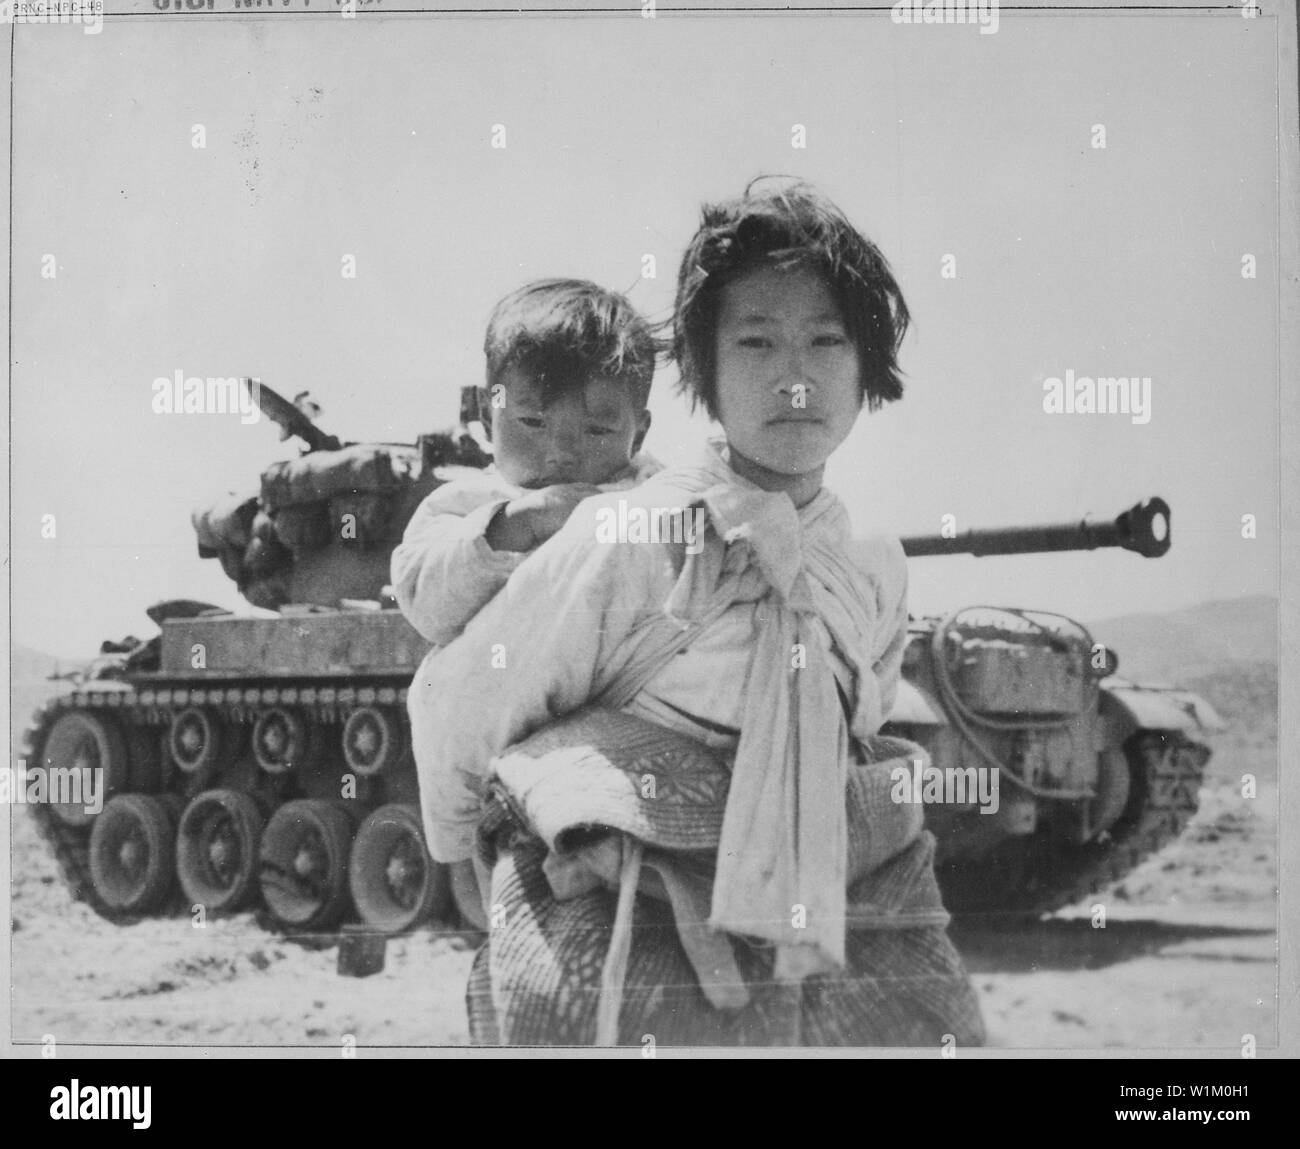 With her brother on her back a war weary Korean girl tiredly trudges by a stalled M-26 tank, at Haengju, Korea.; General notes:  Use War and Conflict Number 1485 when ordering a reproduction or requesting information about this image. Stock Photo